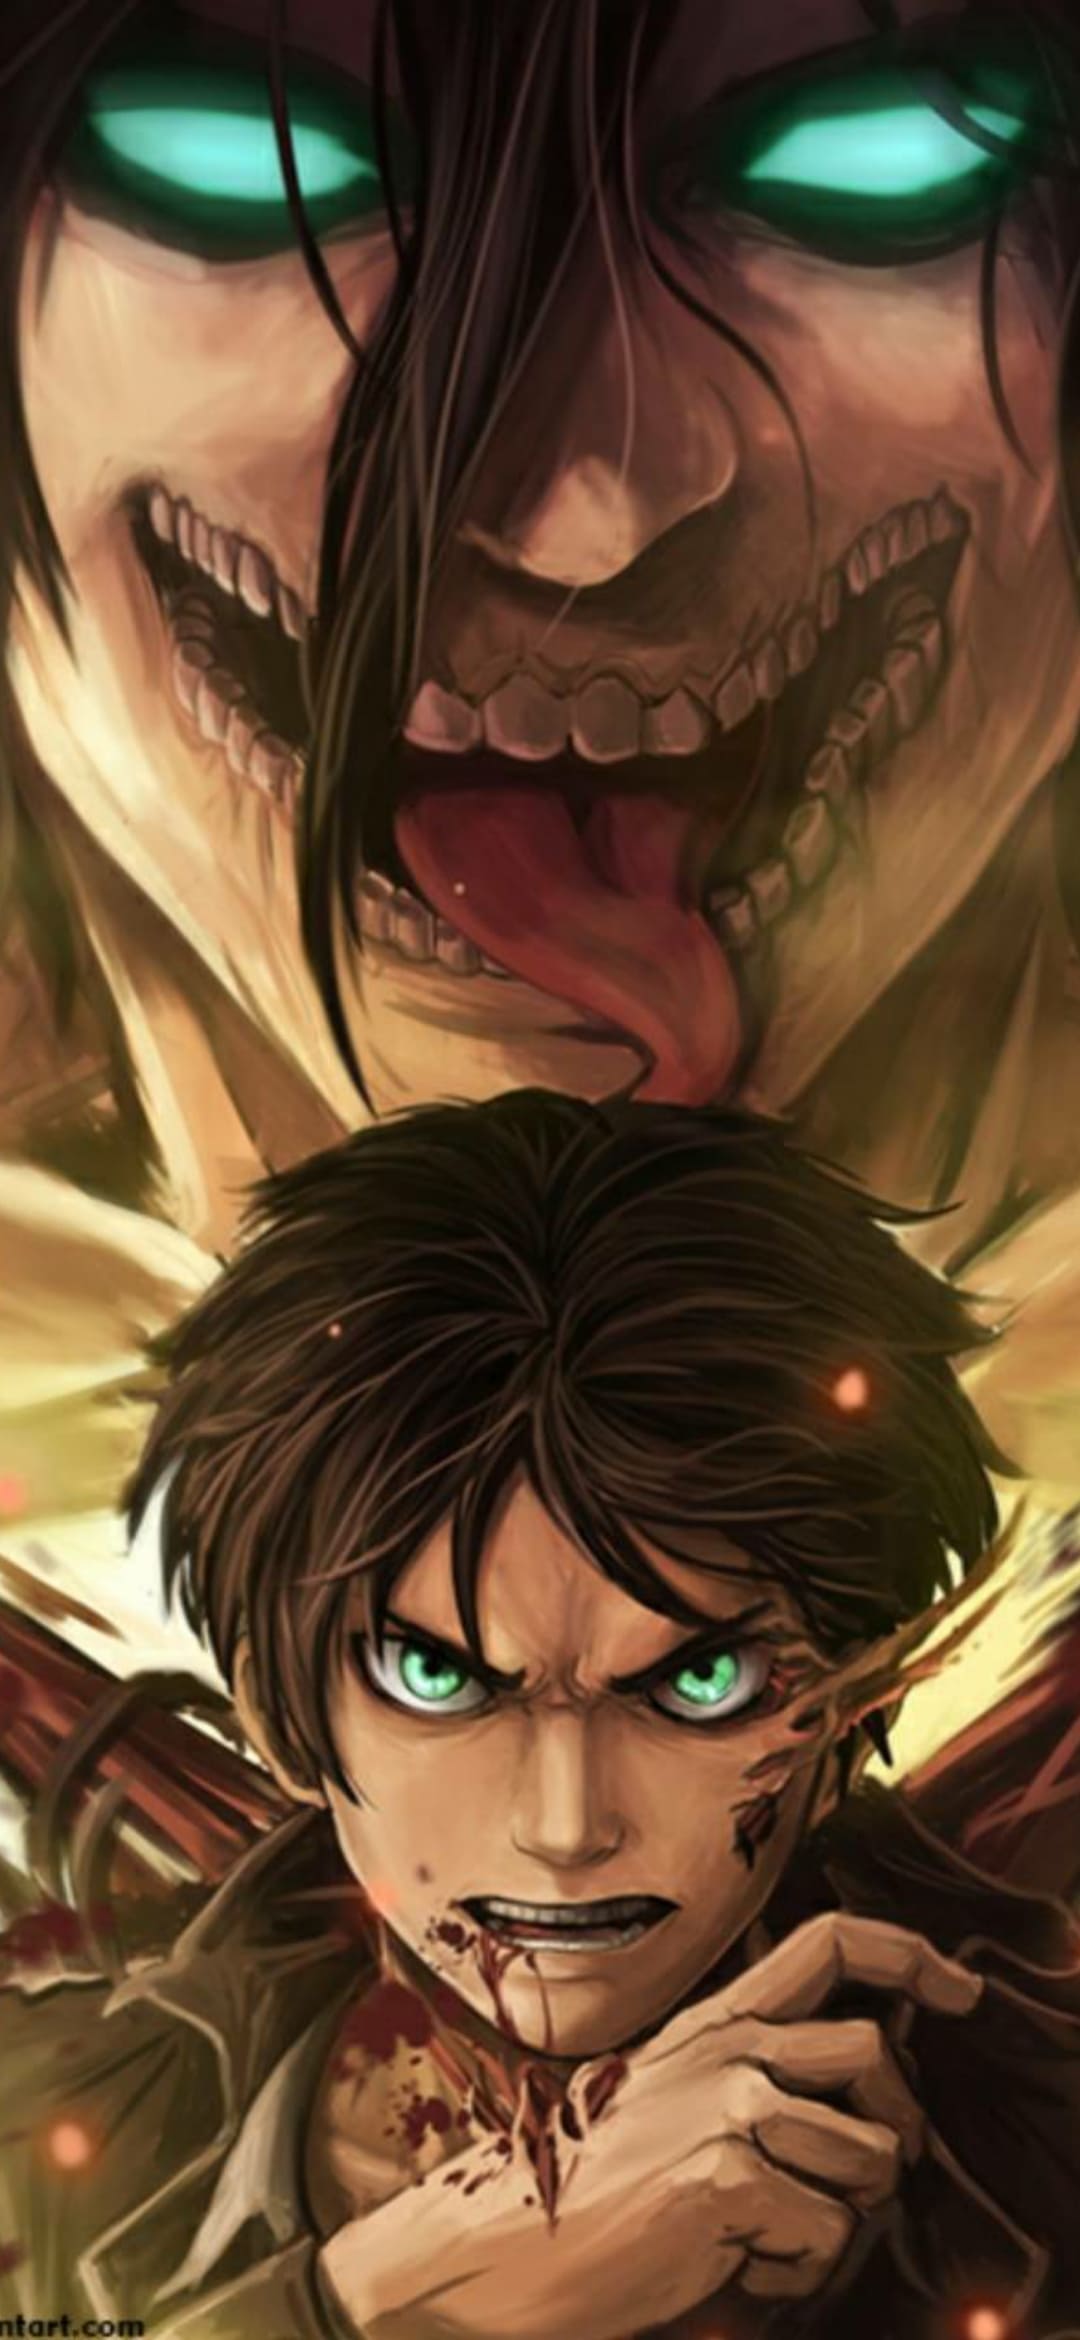 Attack On Titan Android Wallpaper Free Android background